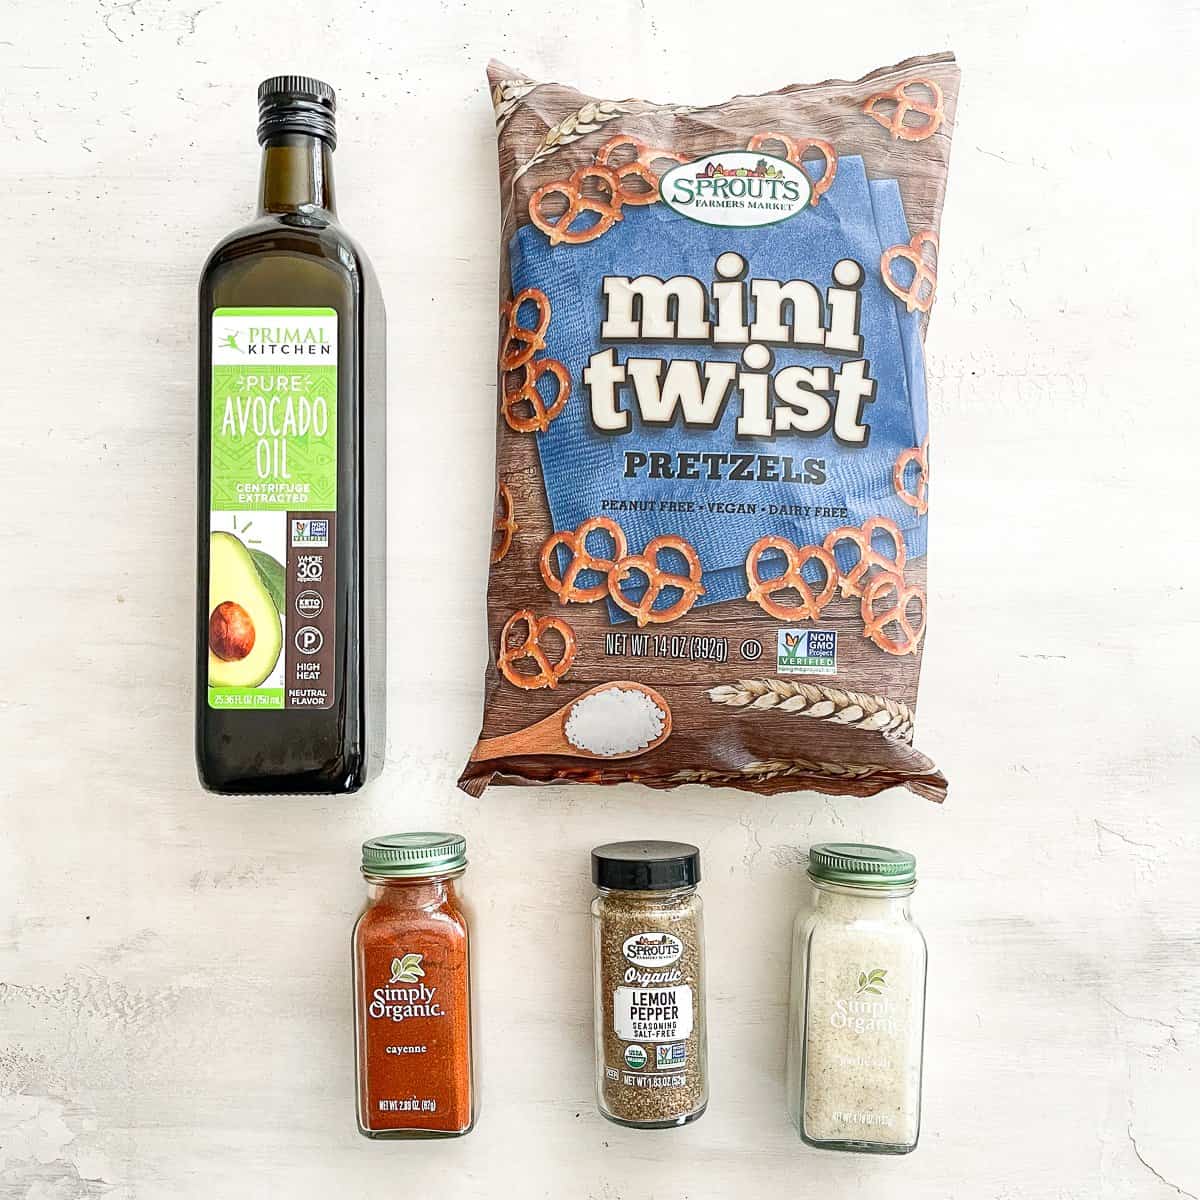 avocado oil, pretzels, and spice ingredients